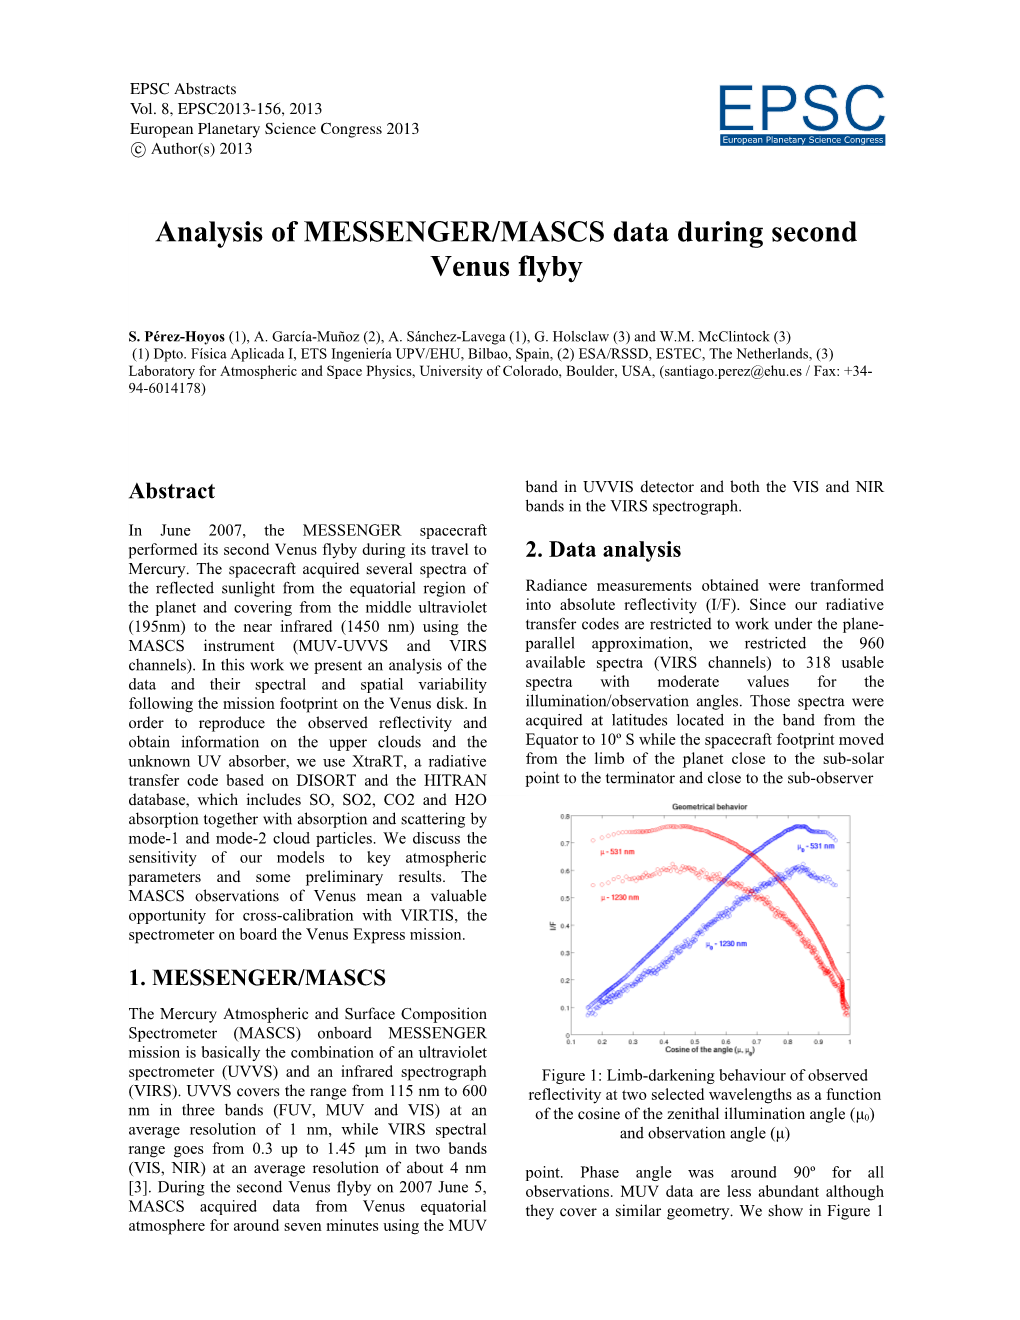 Analysis of MESSENGER/MASCS Data During Second Venus Flyby